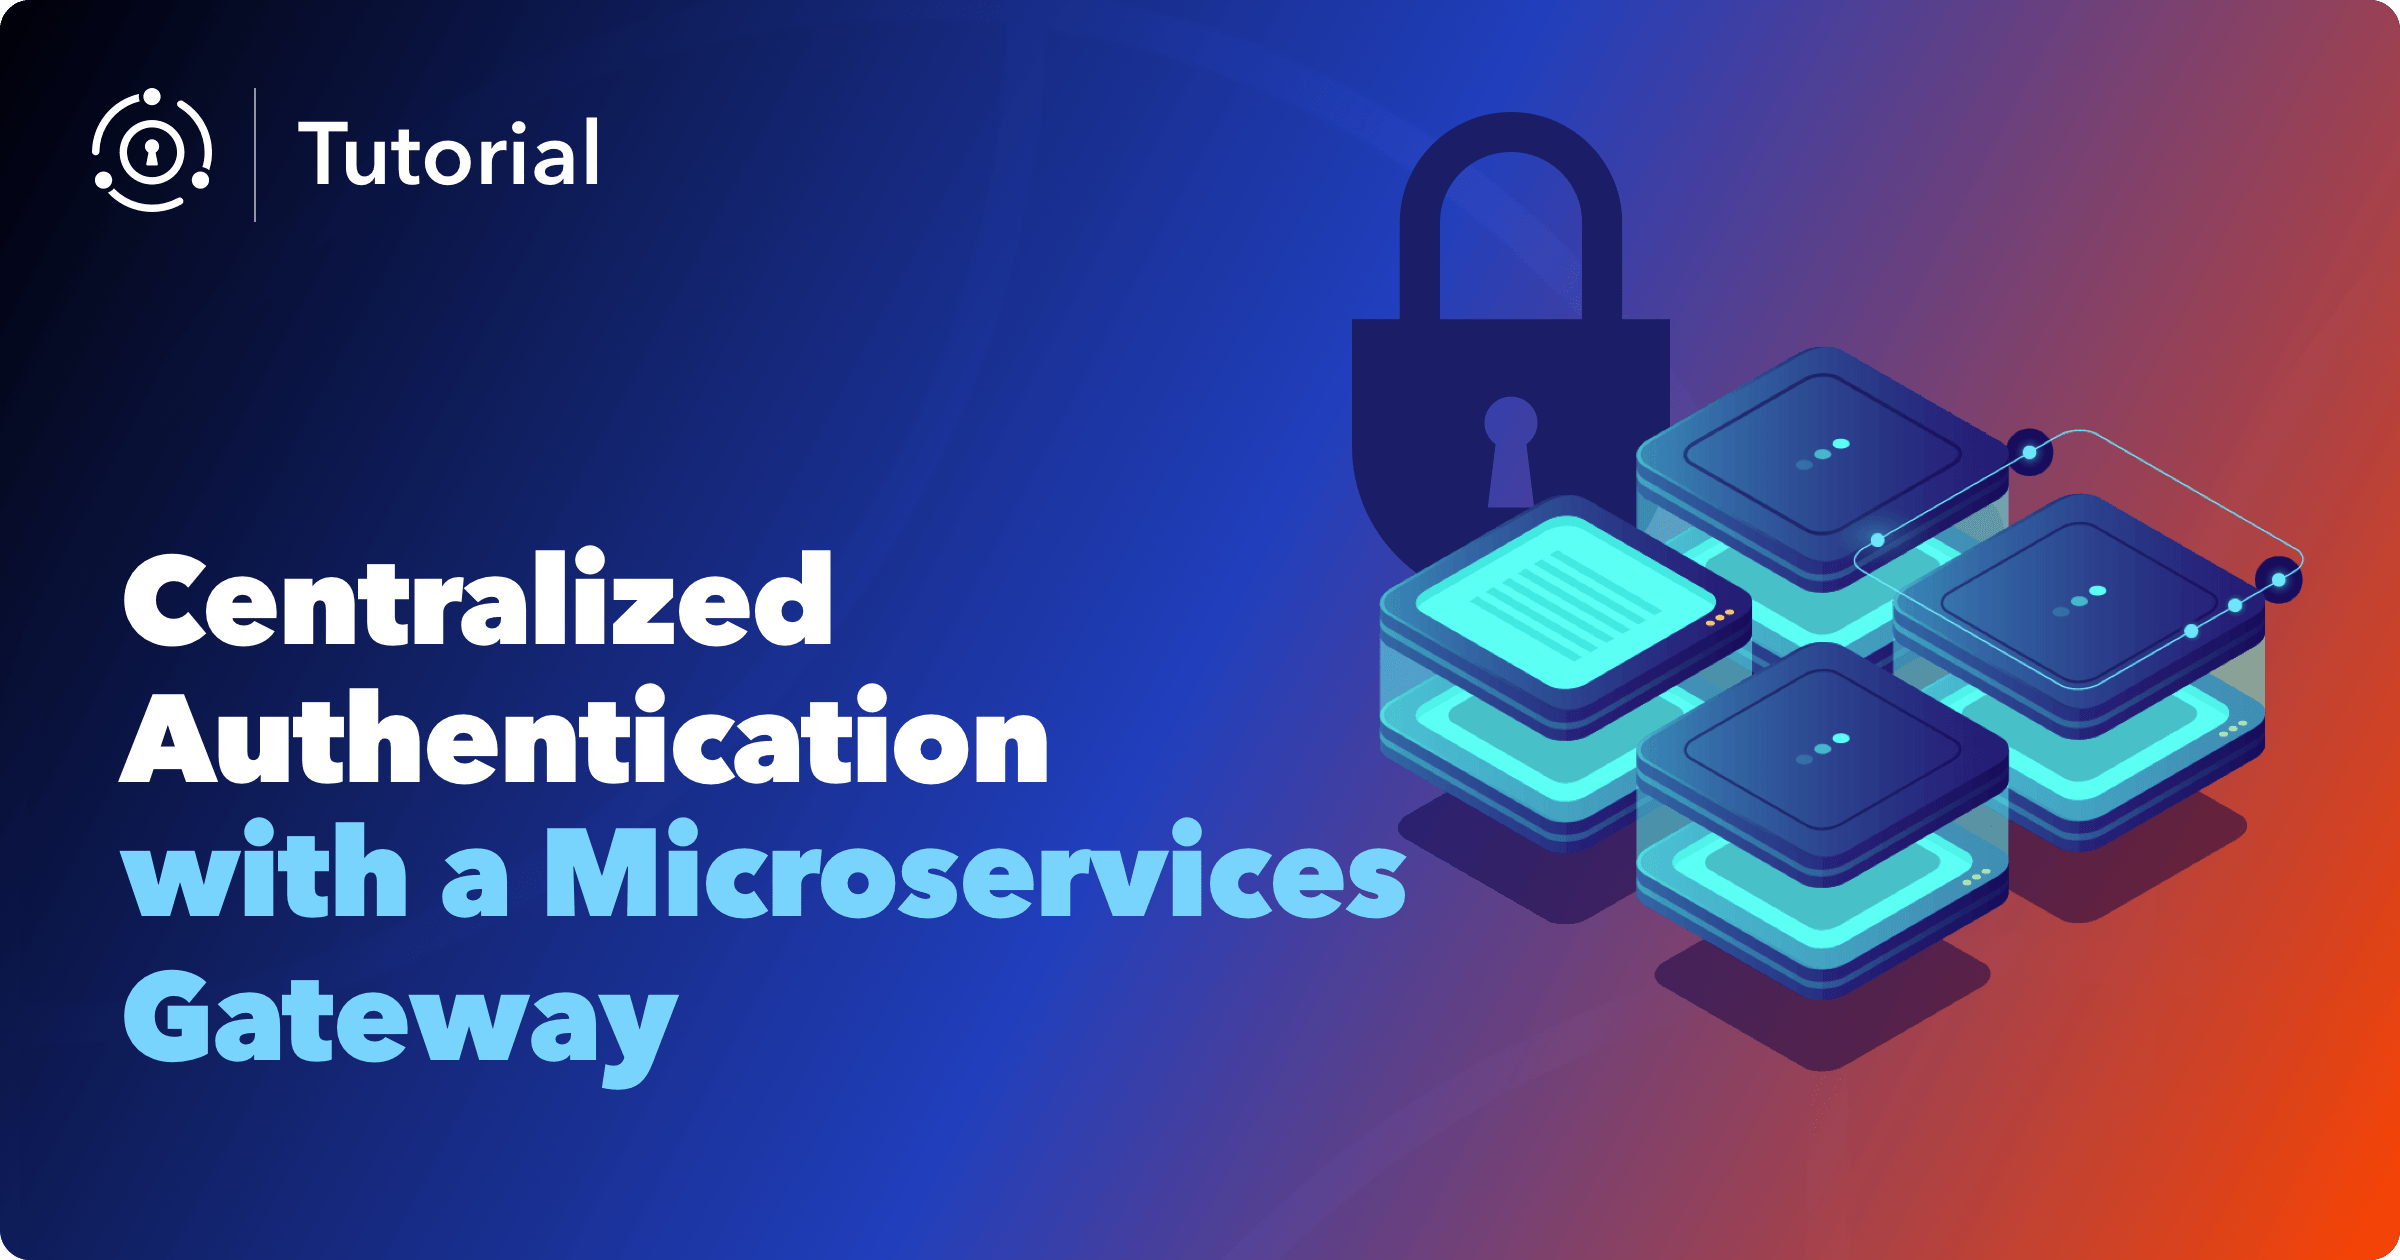 Centralized authentication with a microservices gateway